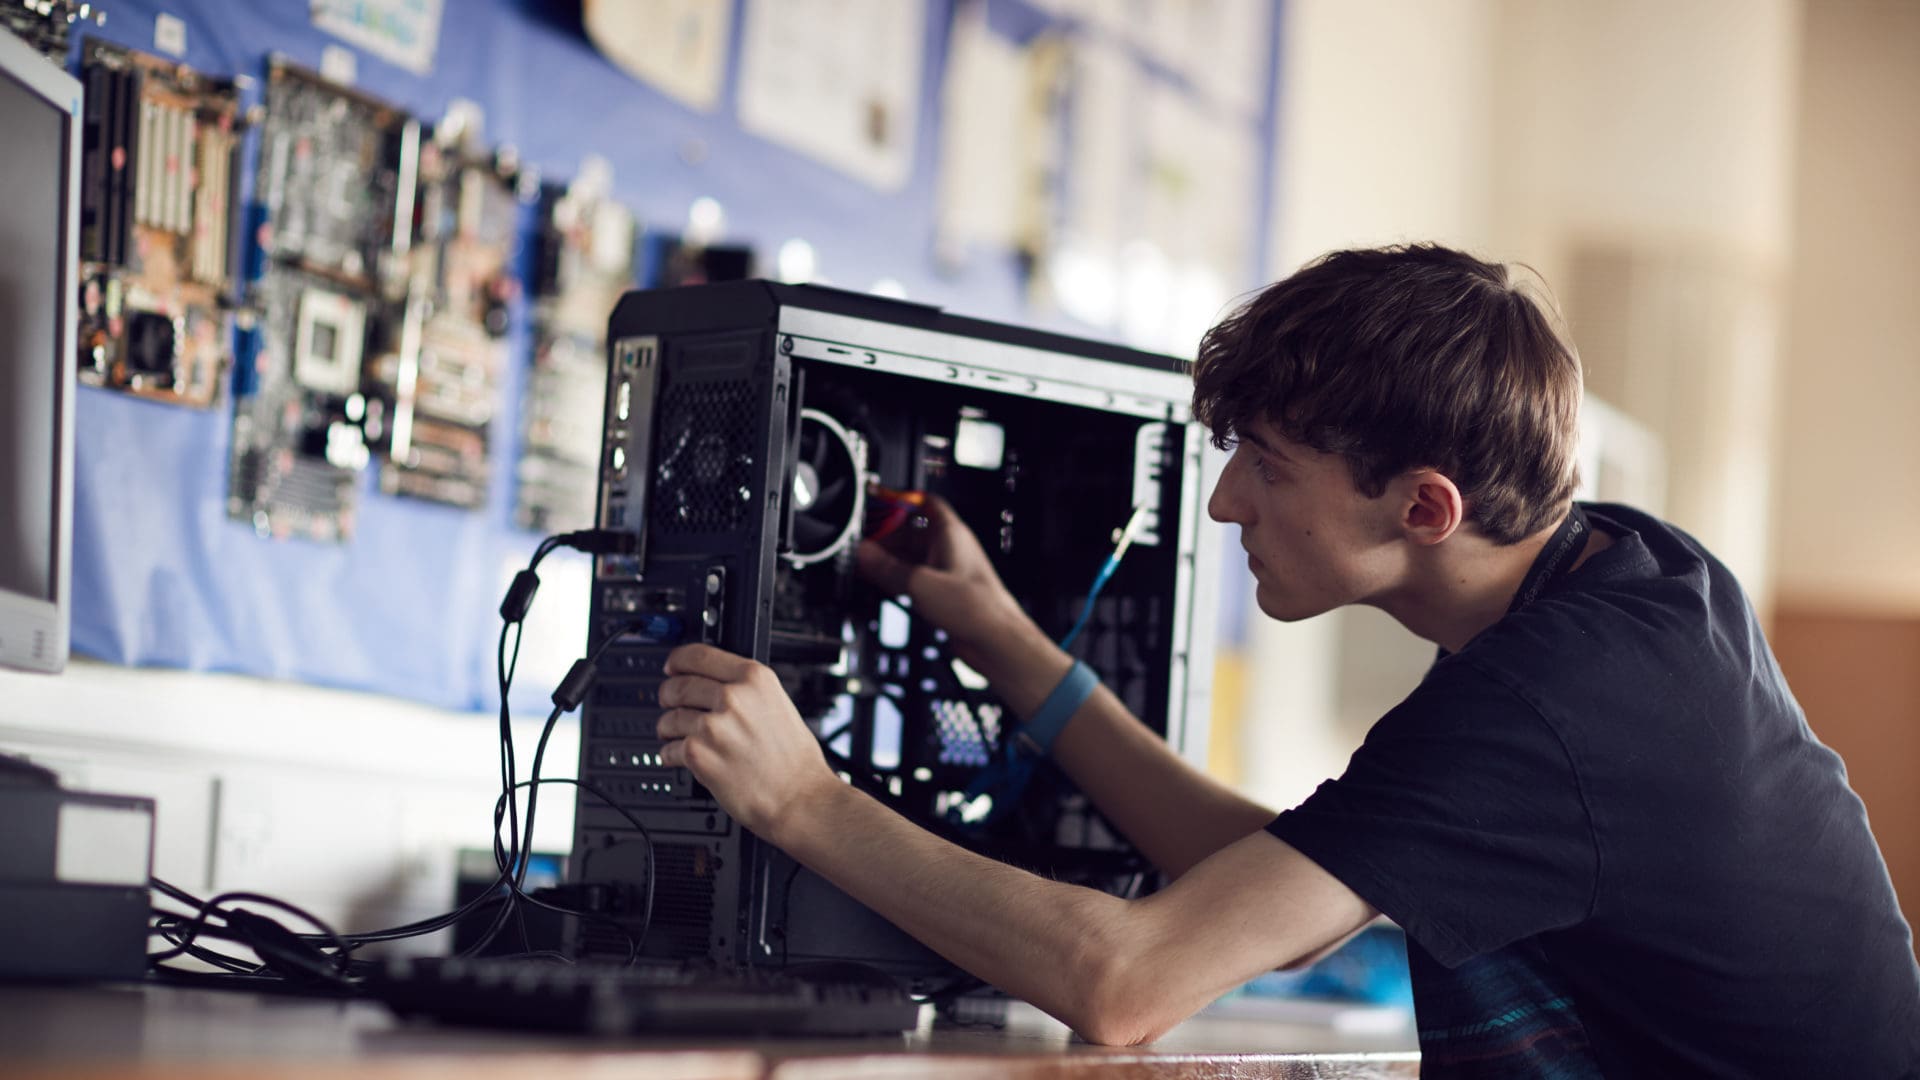 Ӱֱ student focusing on fixing a computer on an IT course